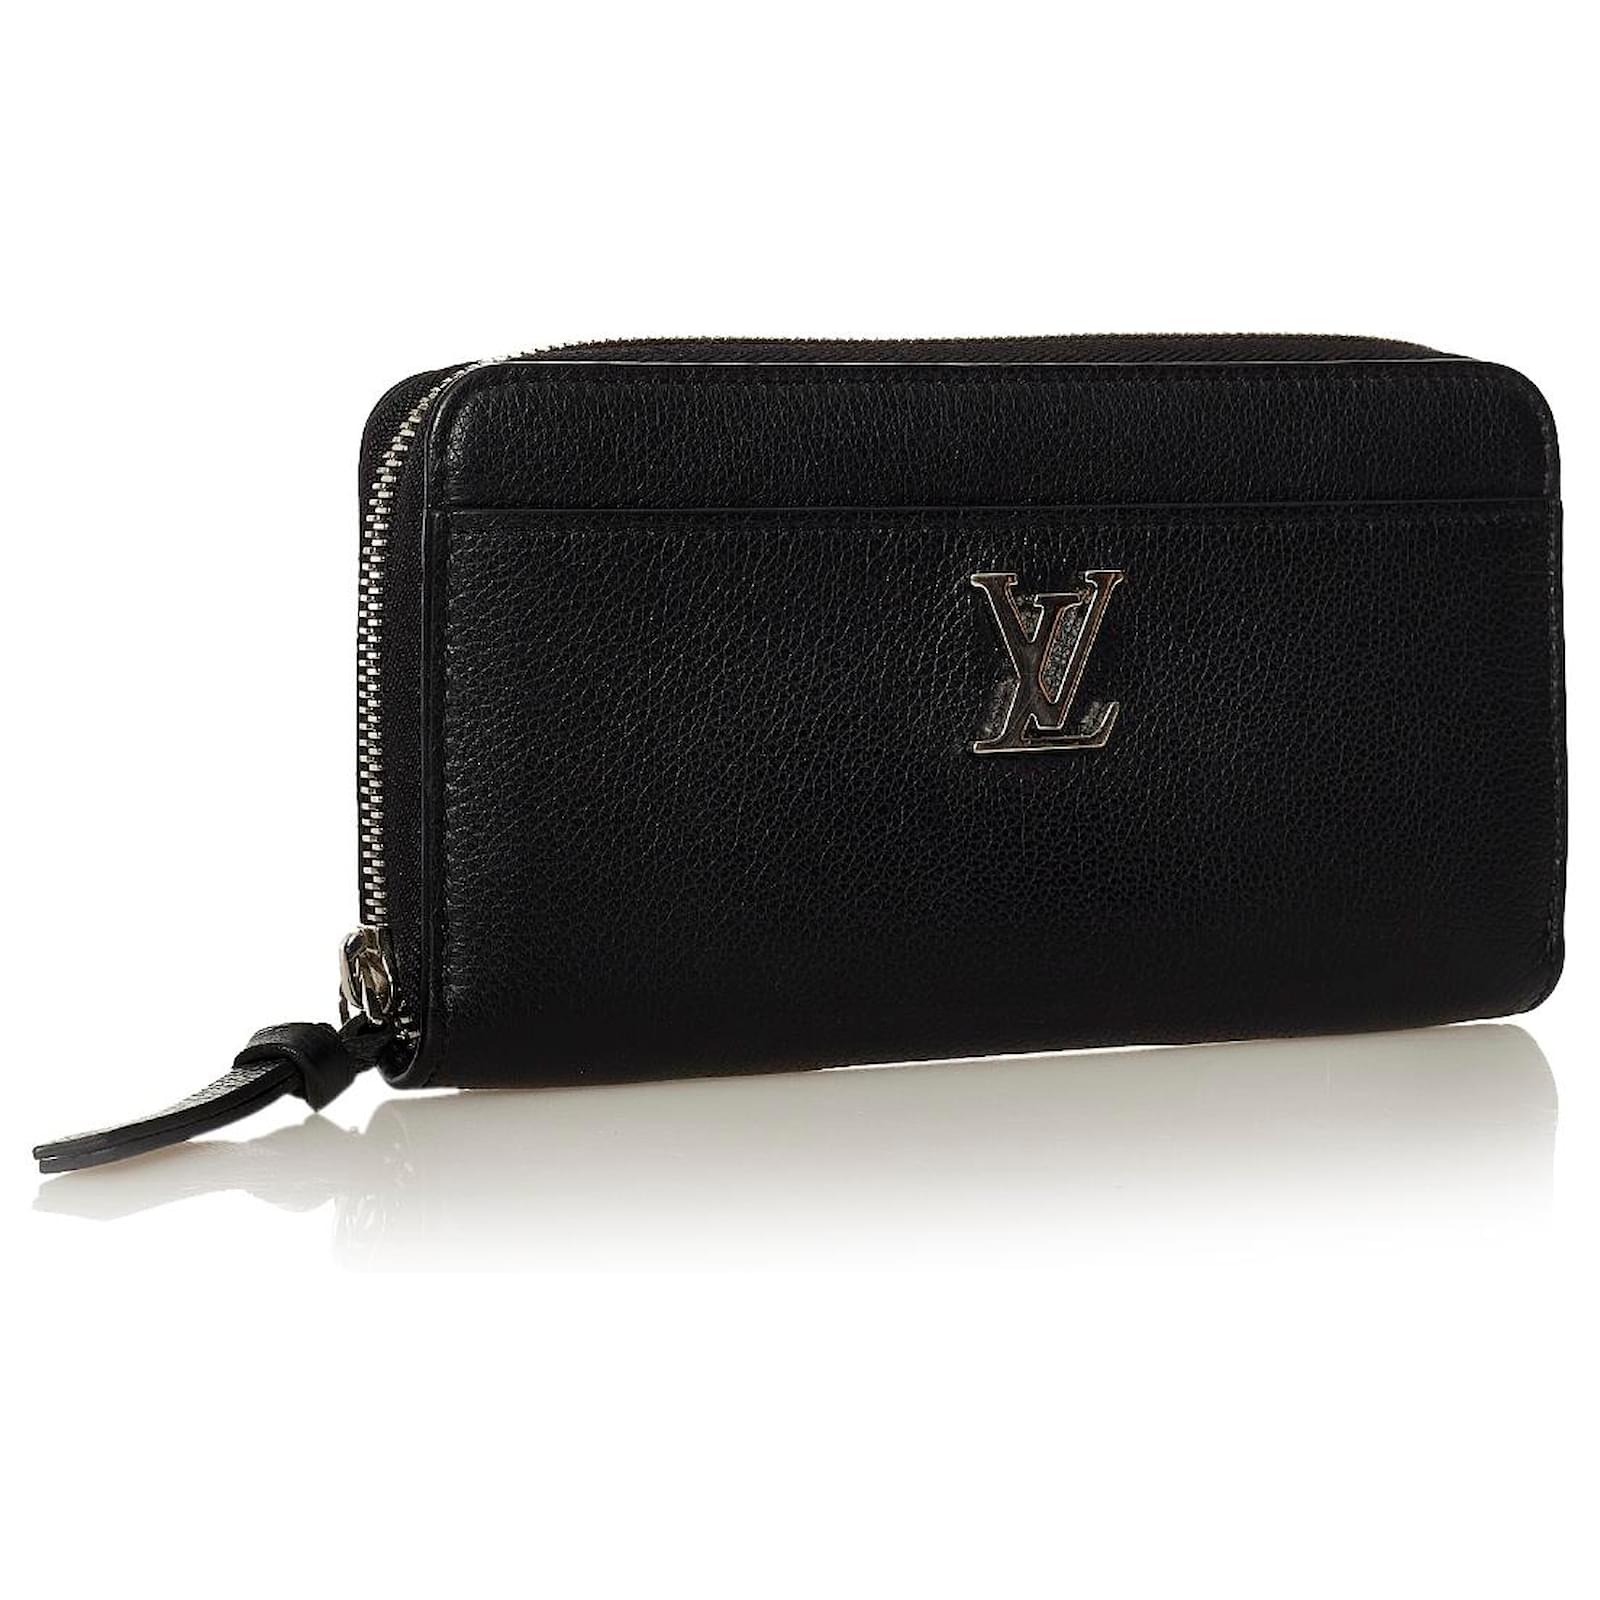 Lockme Zippy Coin Purse Lockme Leather - Wallets and Small Leather